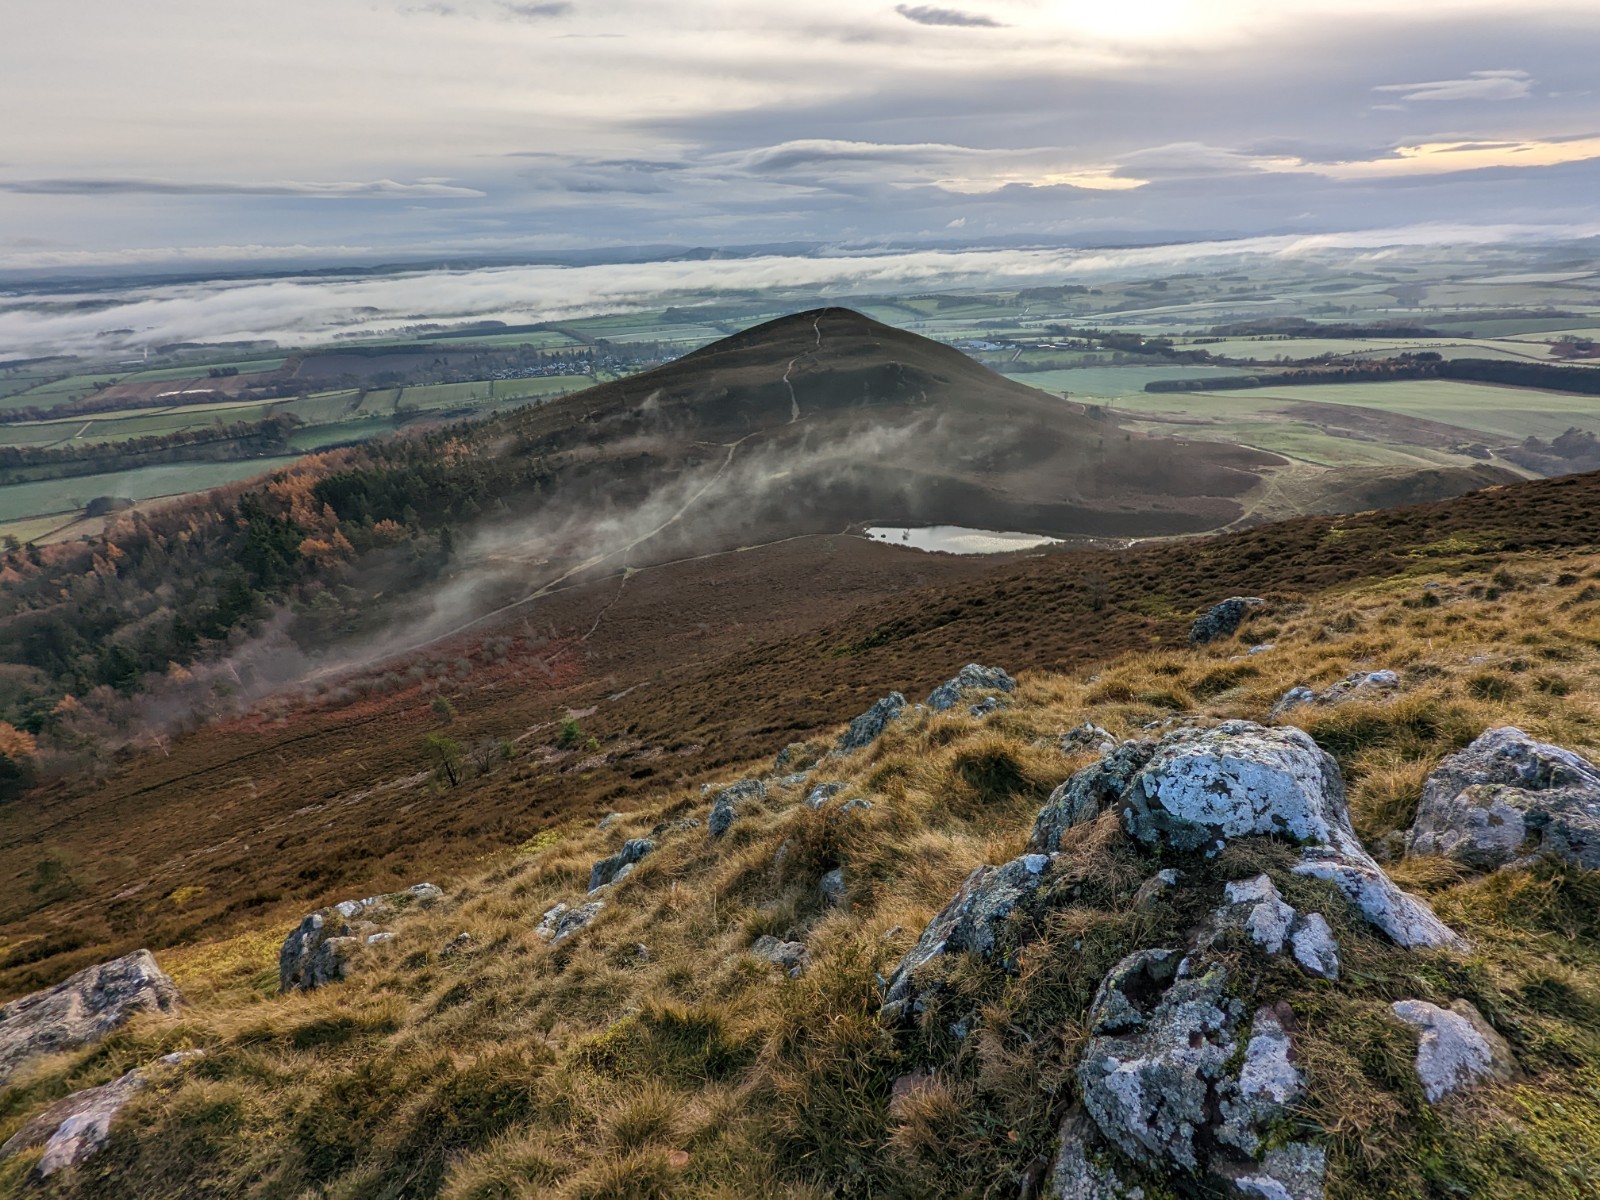 View from atop Eildon Mid Hill. Tumbled stones amid yellowed grass direct the eye to the peak of a brown hill and wisps of mist in the middle distance. Vast tracts of the Scottish Borders extends beyond and meet a wall of mist miles away.